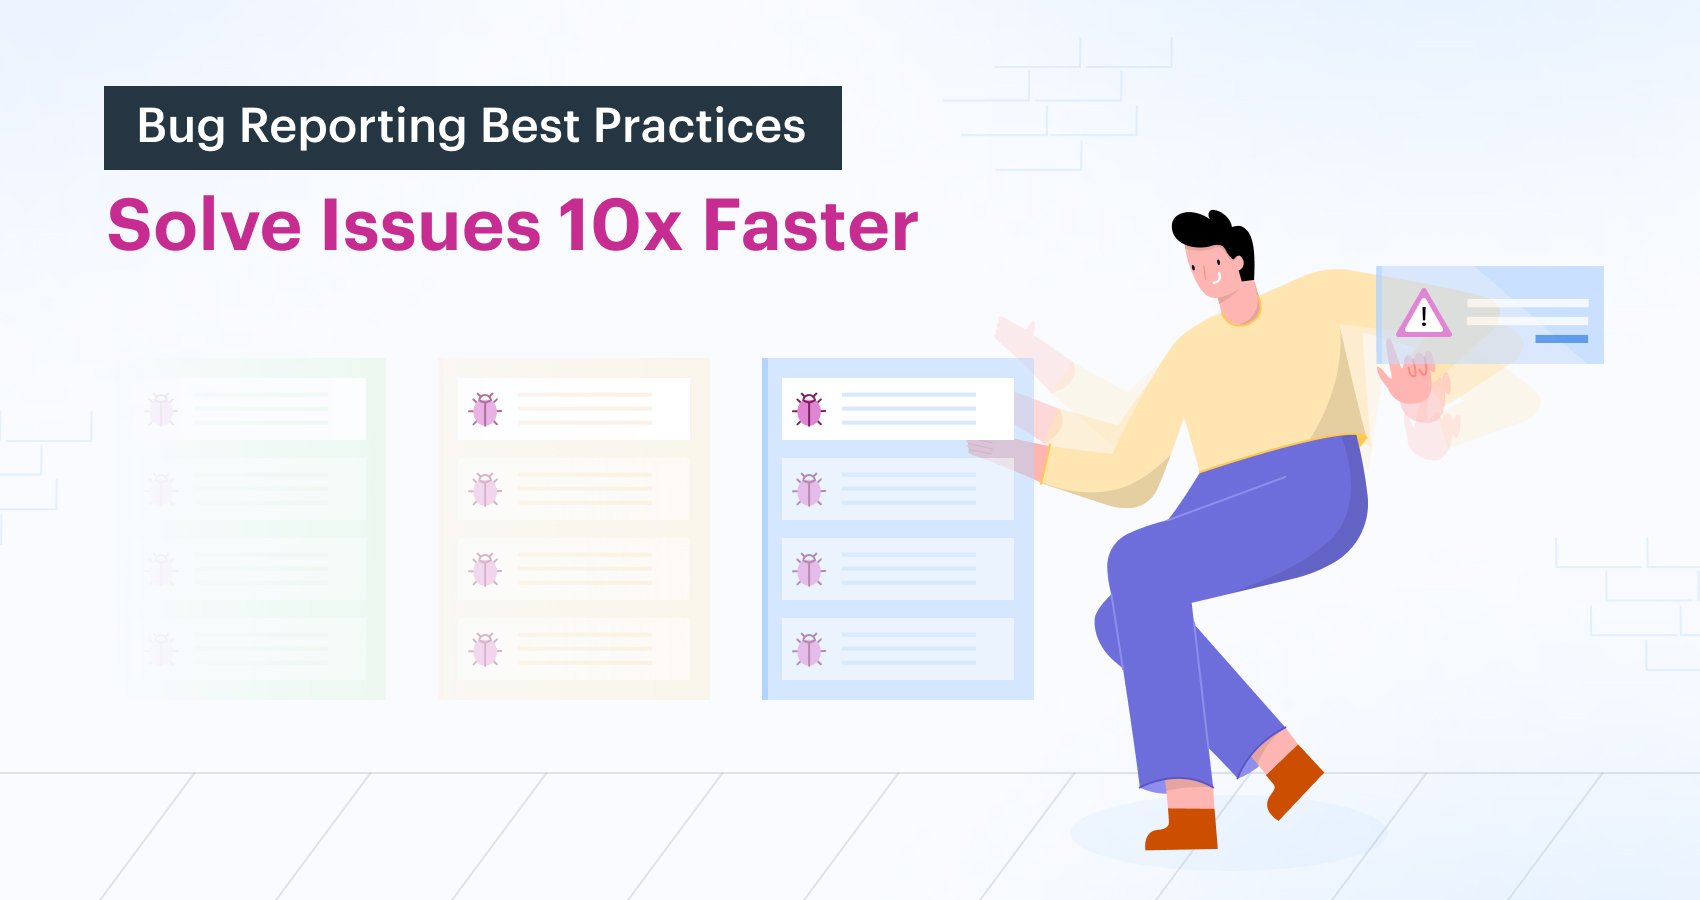 Bug Reporting Best Practices to Solve Issues 10X faster